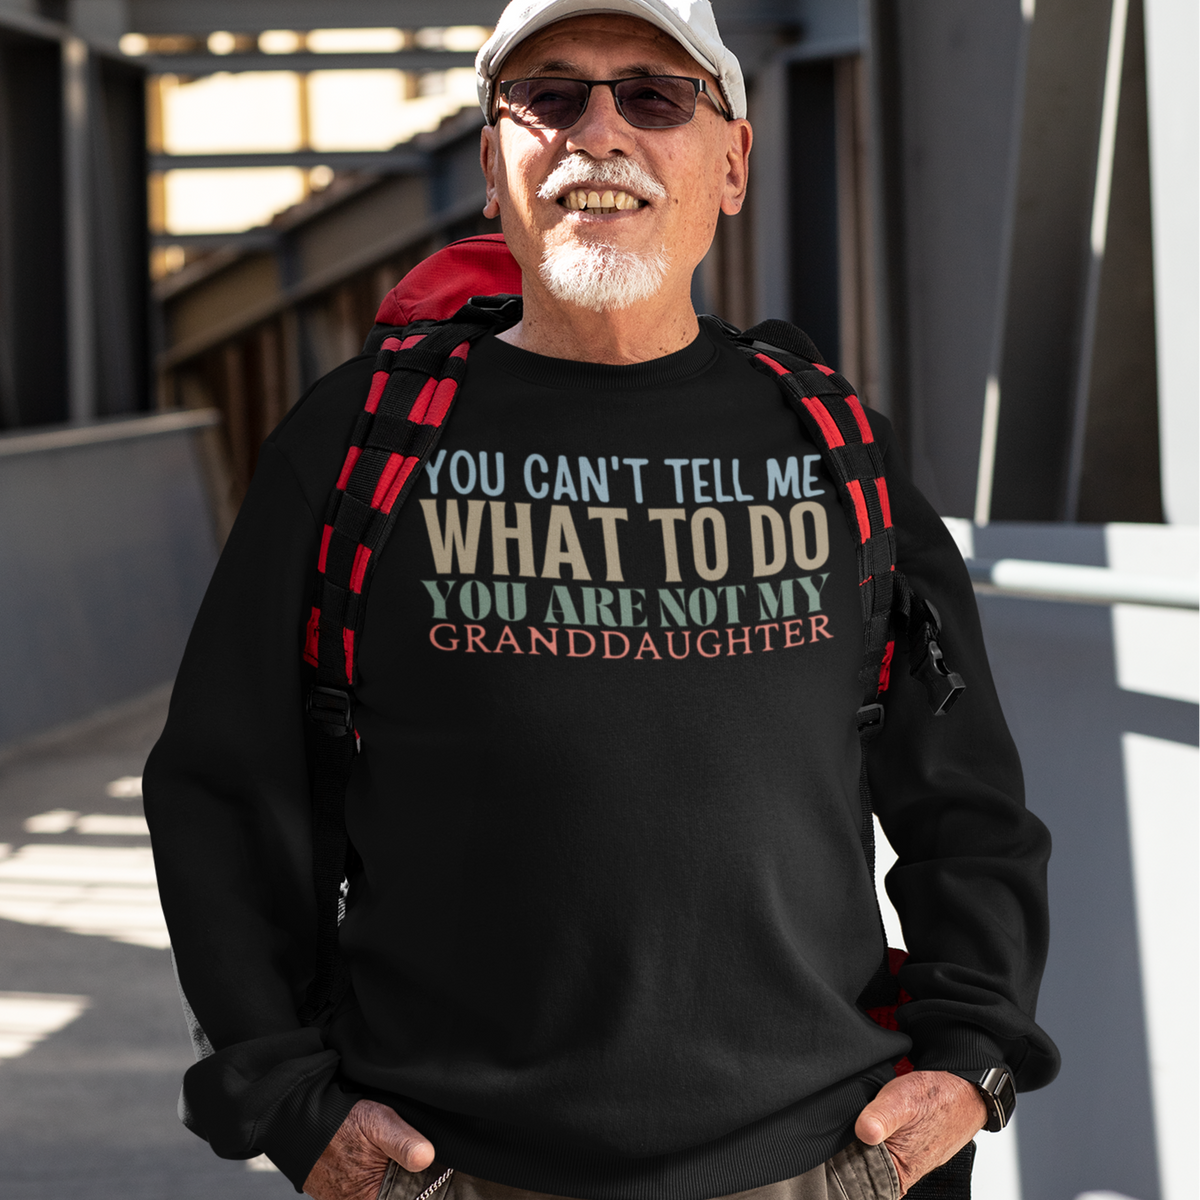 Granddad sweatshirt, fathers day shirt, funny mens shirt, sweatshirt, gift for him, gift for her, funny grandma tee, funny granddad tee, new papa shirt, father sweatshirt, you can't tell me what to do you are not my granddaughter, new granddaddy shirt